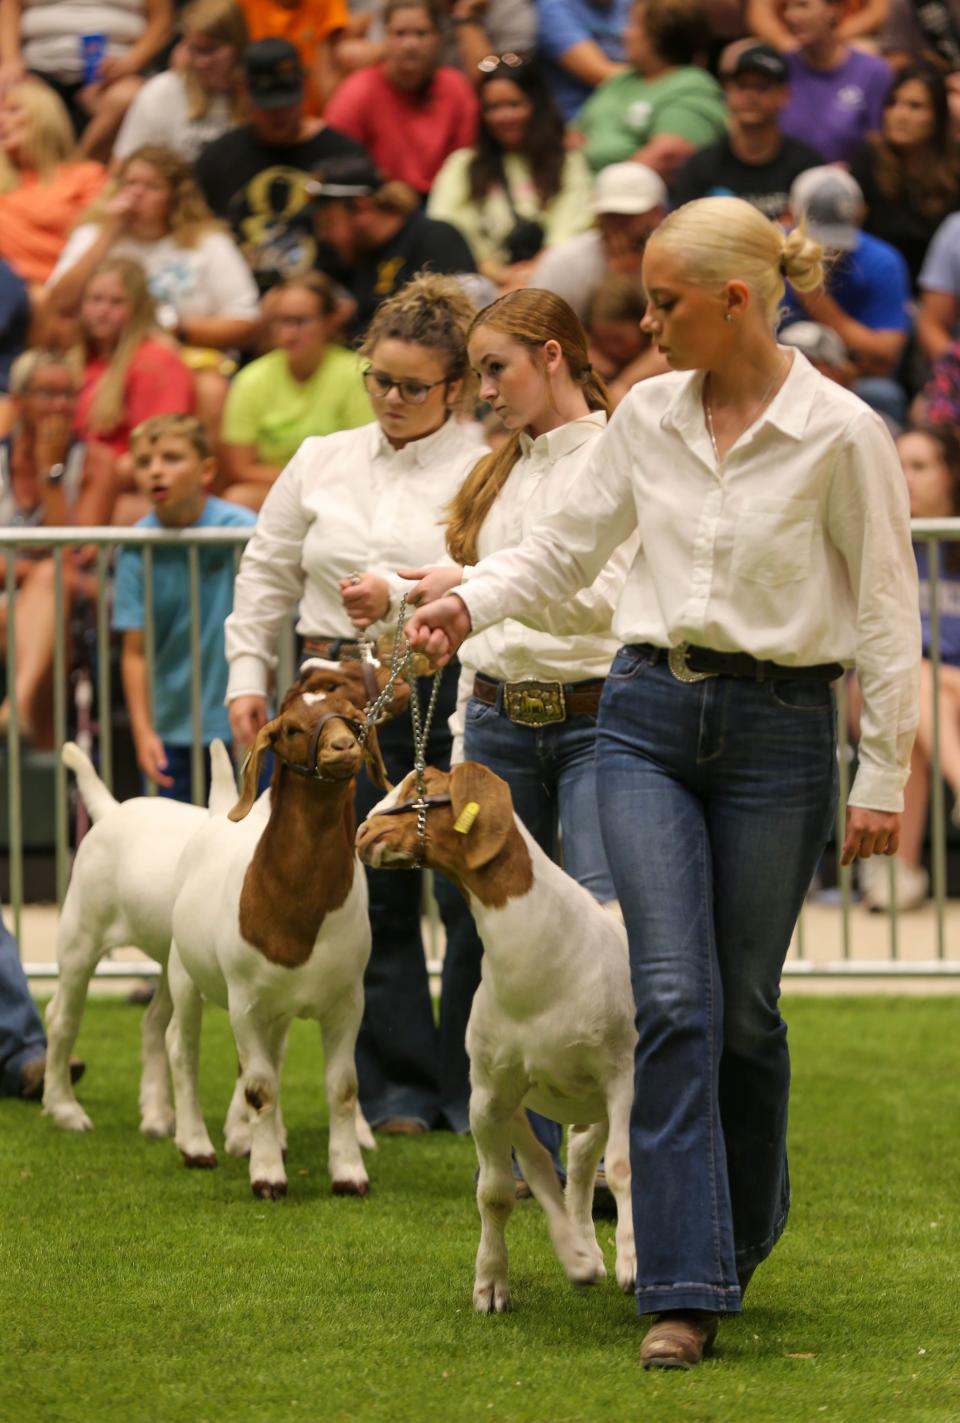 Ryley McGee, Skylar Sheets, and Rachel Townsend guide their goats around the course at the 2022's 4-H Supreme Livestock Showmanship, Thursday, July 21, 2022, at the Tippecanoe County 4-H Fairgrounds in Lafayette, Ind.